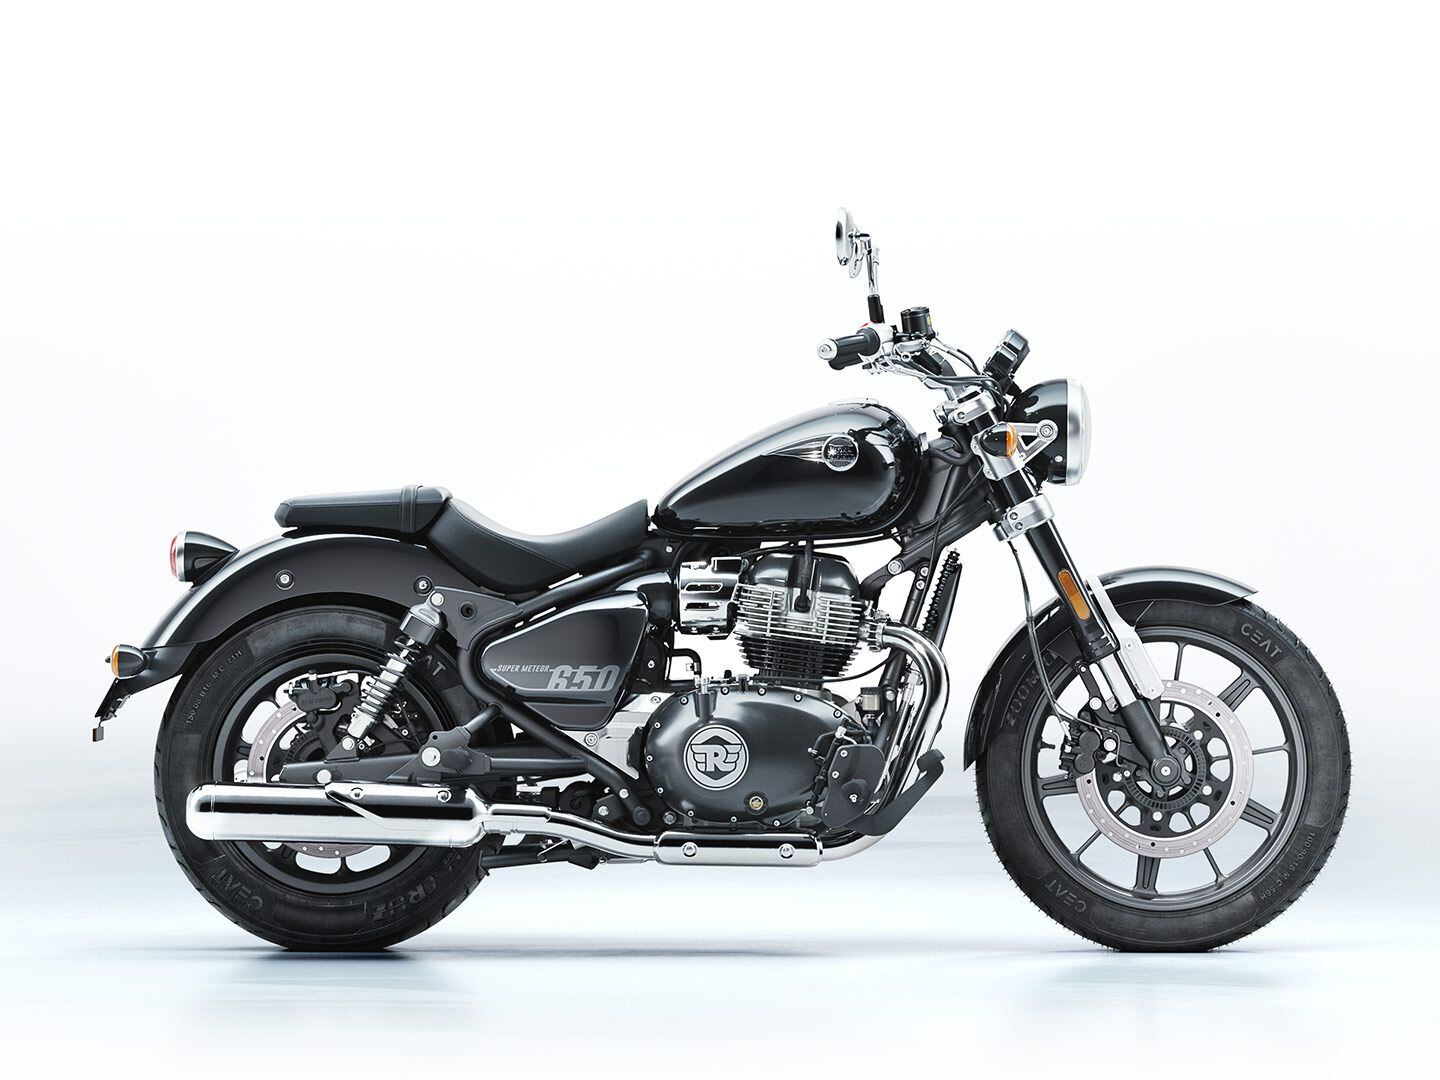 Royal Enfield’s Super Meteor 650 utilizes the same 648cc parallel twin as the INT650 and Continental GT 650.